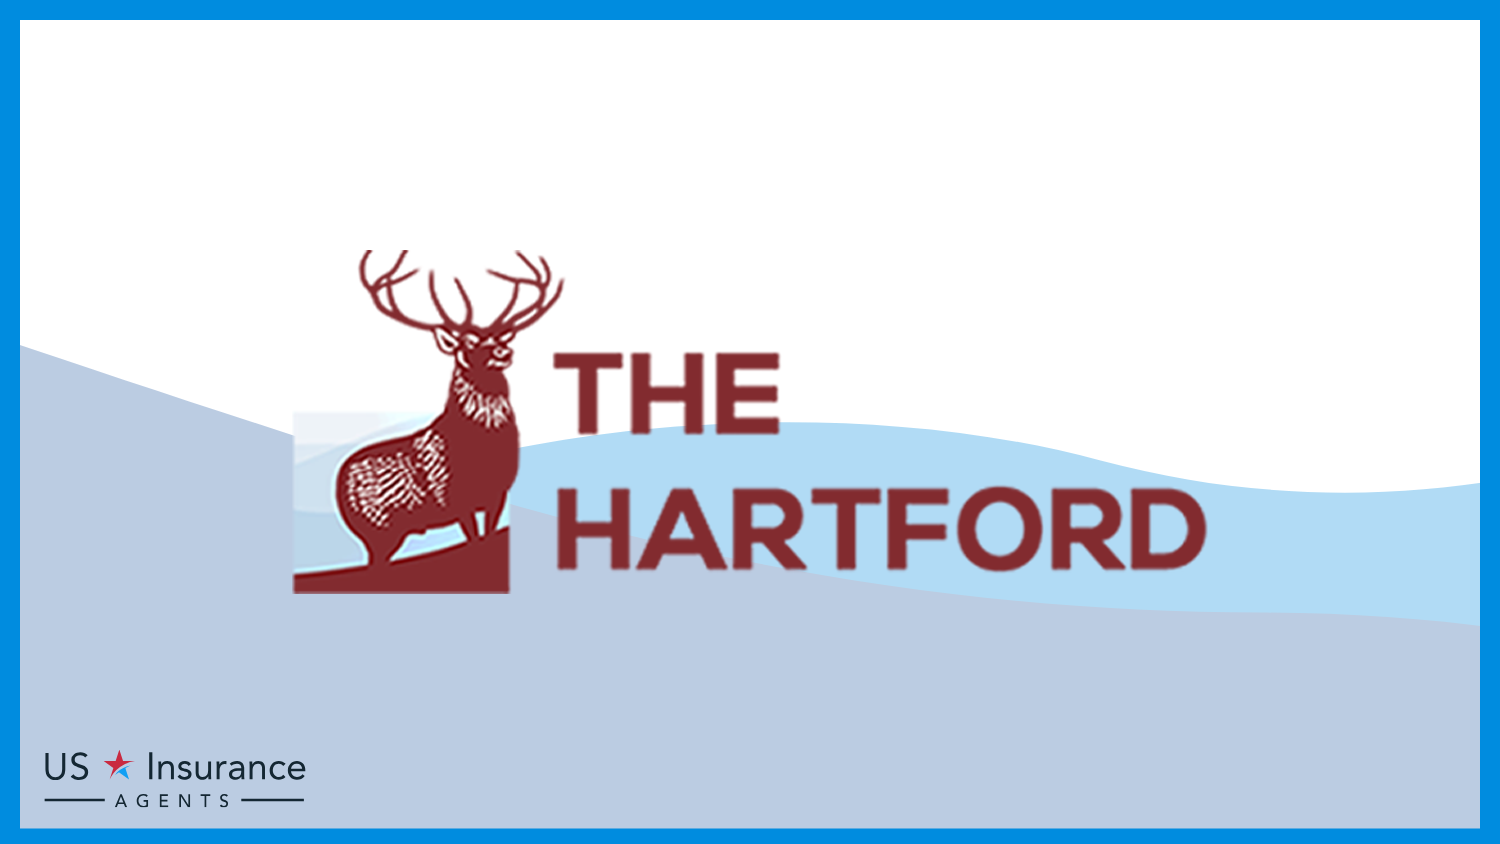 The Hartford: Best Business Insurance for Axe-Throwing Companies